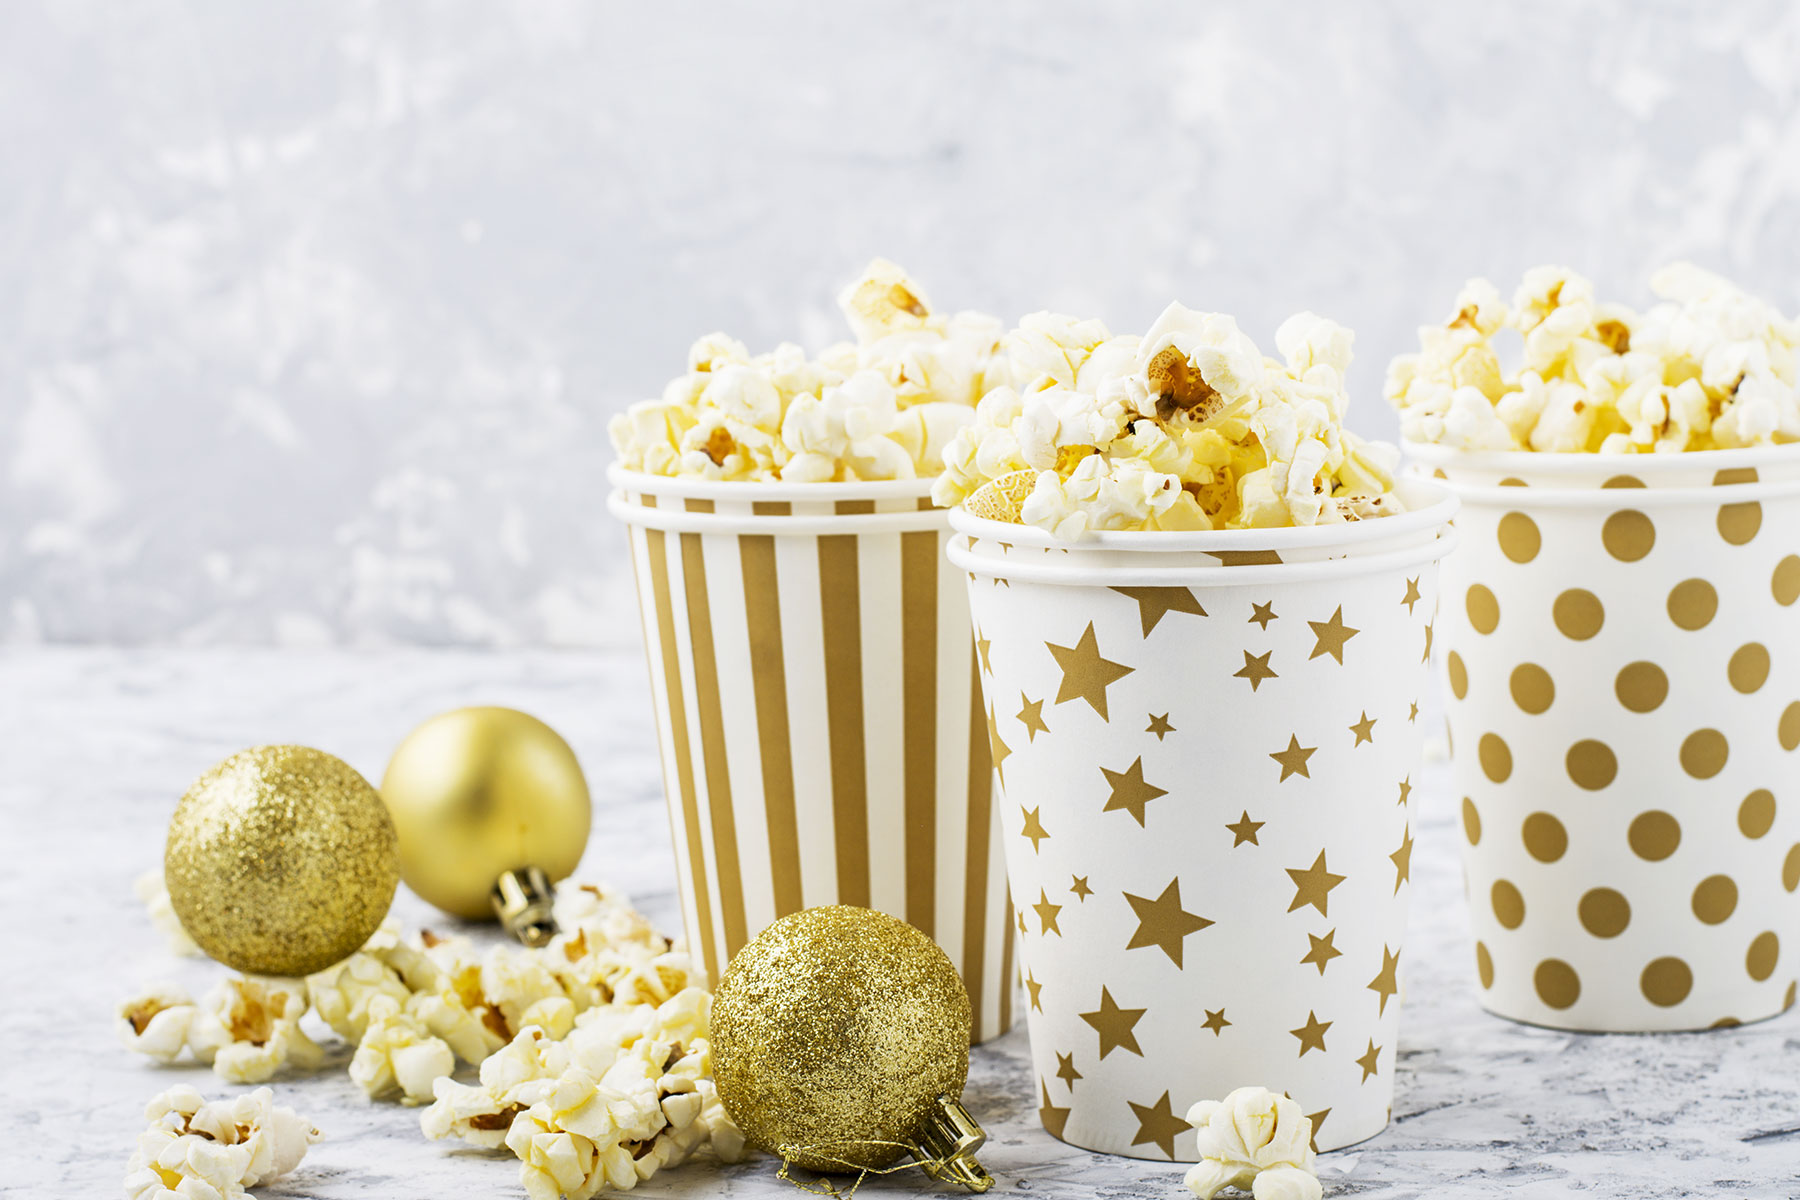 popcorn in festive white and gold cups with holiday decorations around them